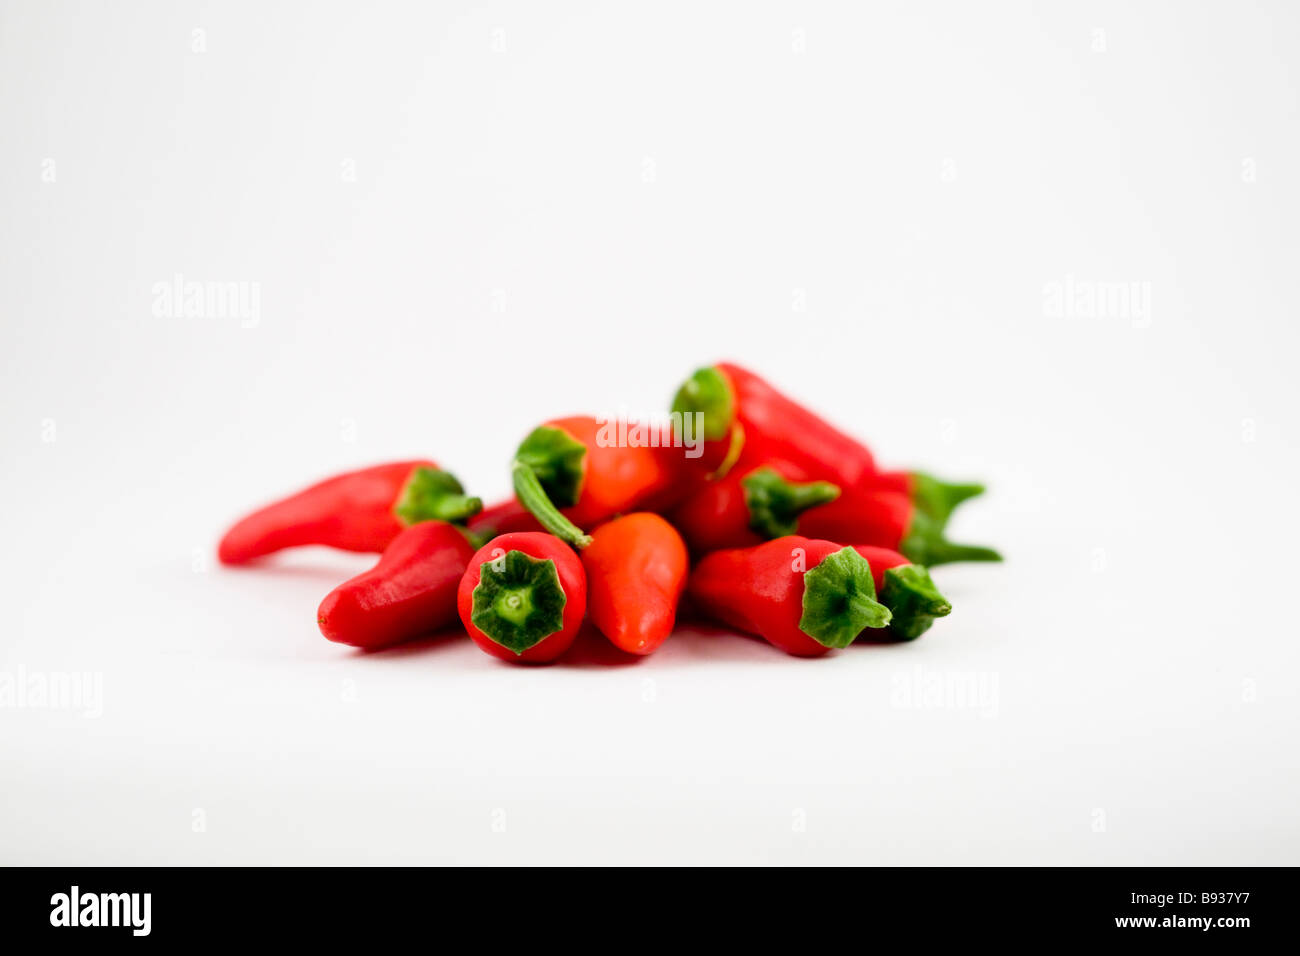 Red chillis on white background Stock Photo